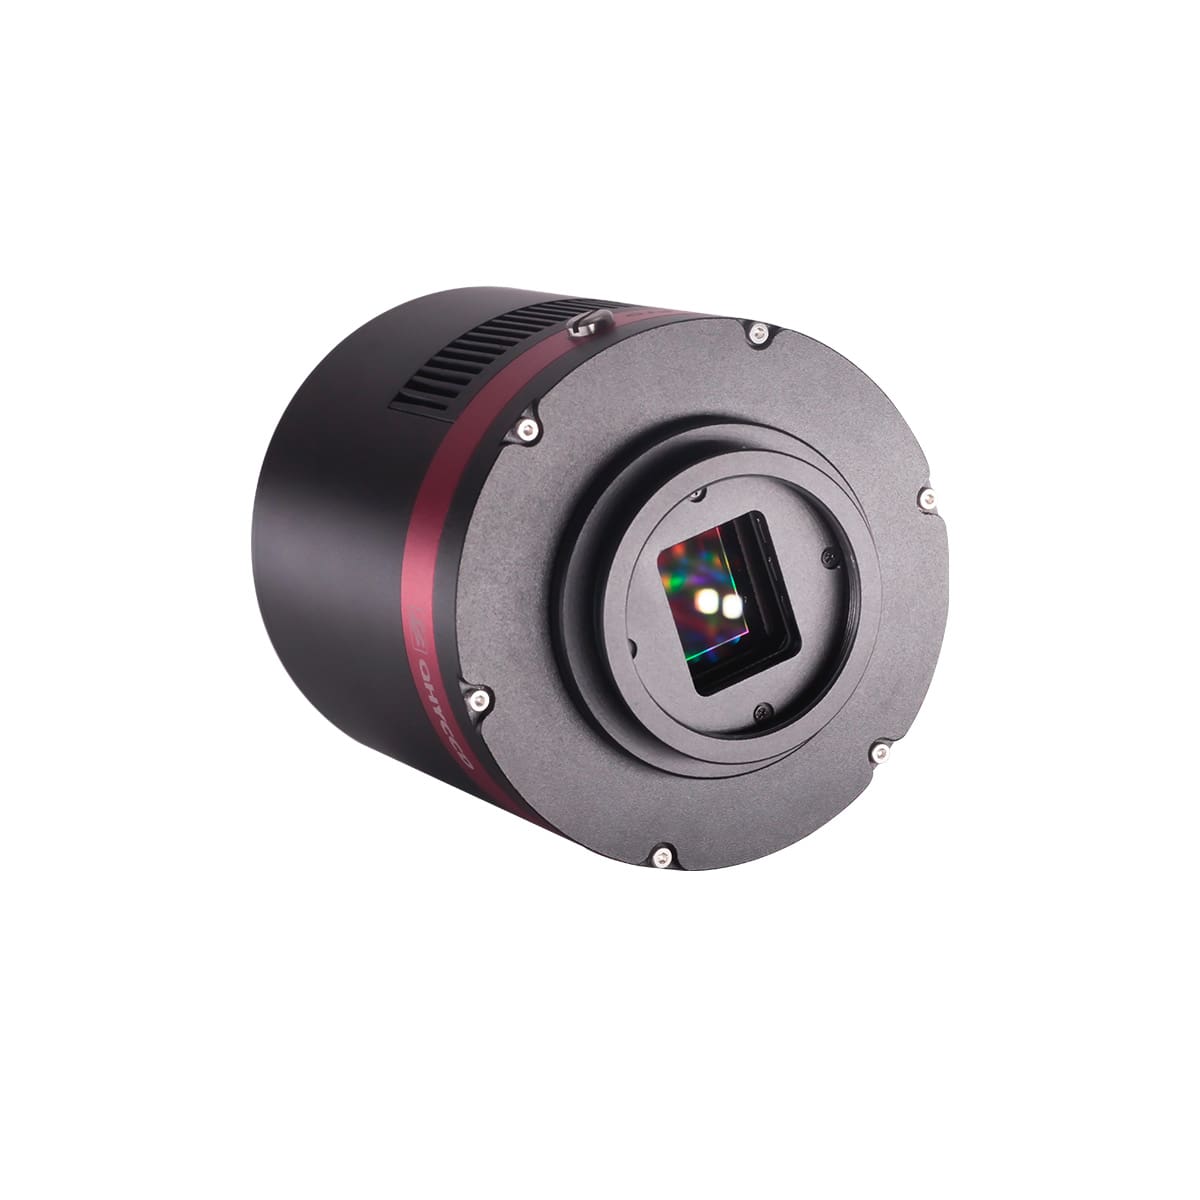 The new QHY294Pro is a 4/3-inch back-illuminated camera, equipped with IMX 492 (Mono) sensor. The QHY294 Pro series camera is capable of locking and unlocking the on-chip binning to provide two readout modes. 